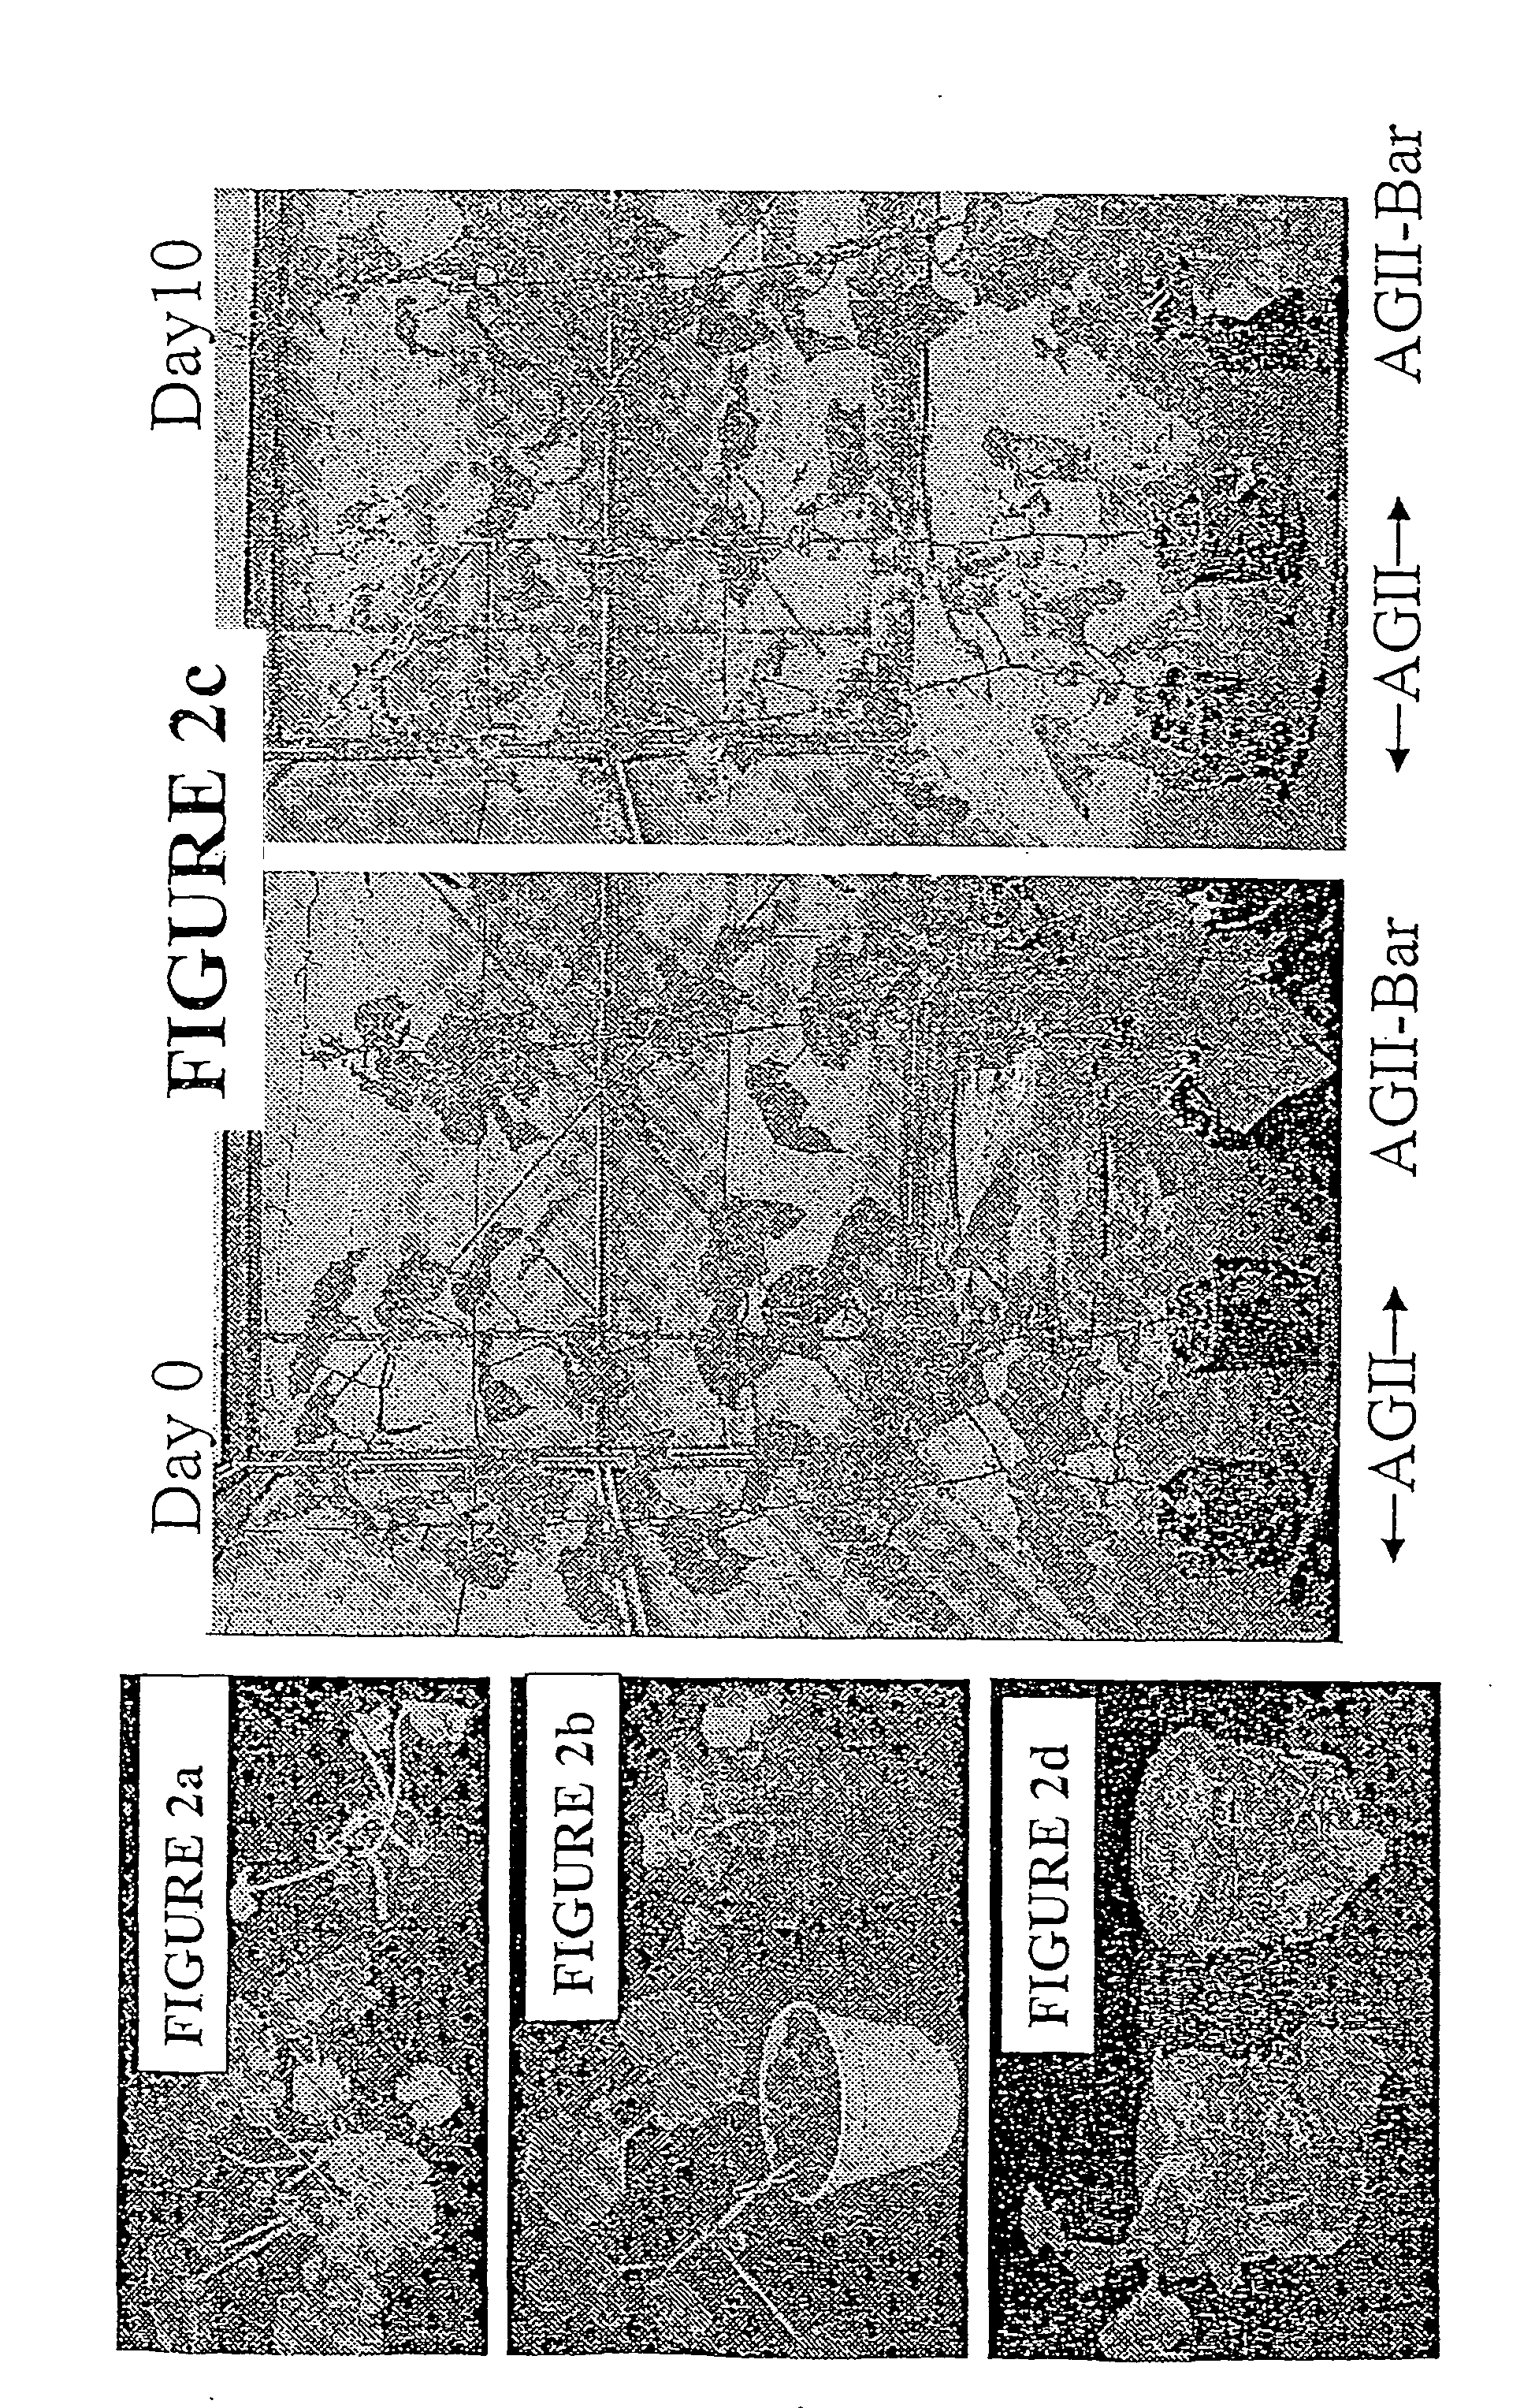 Vectors capable of imparting herbicide resistance and viral cross protection and methods